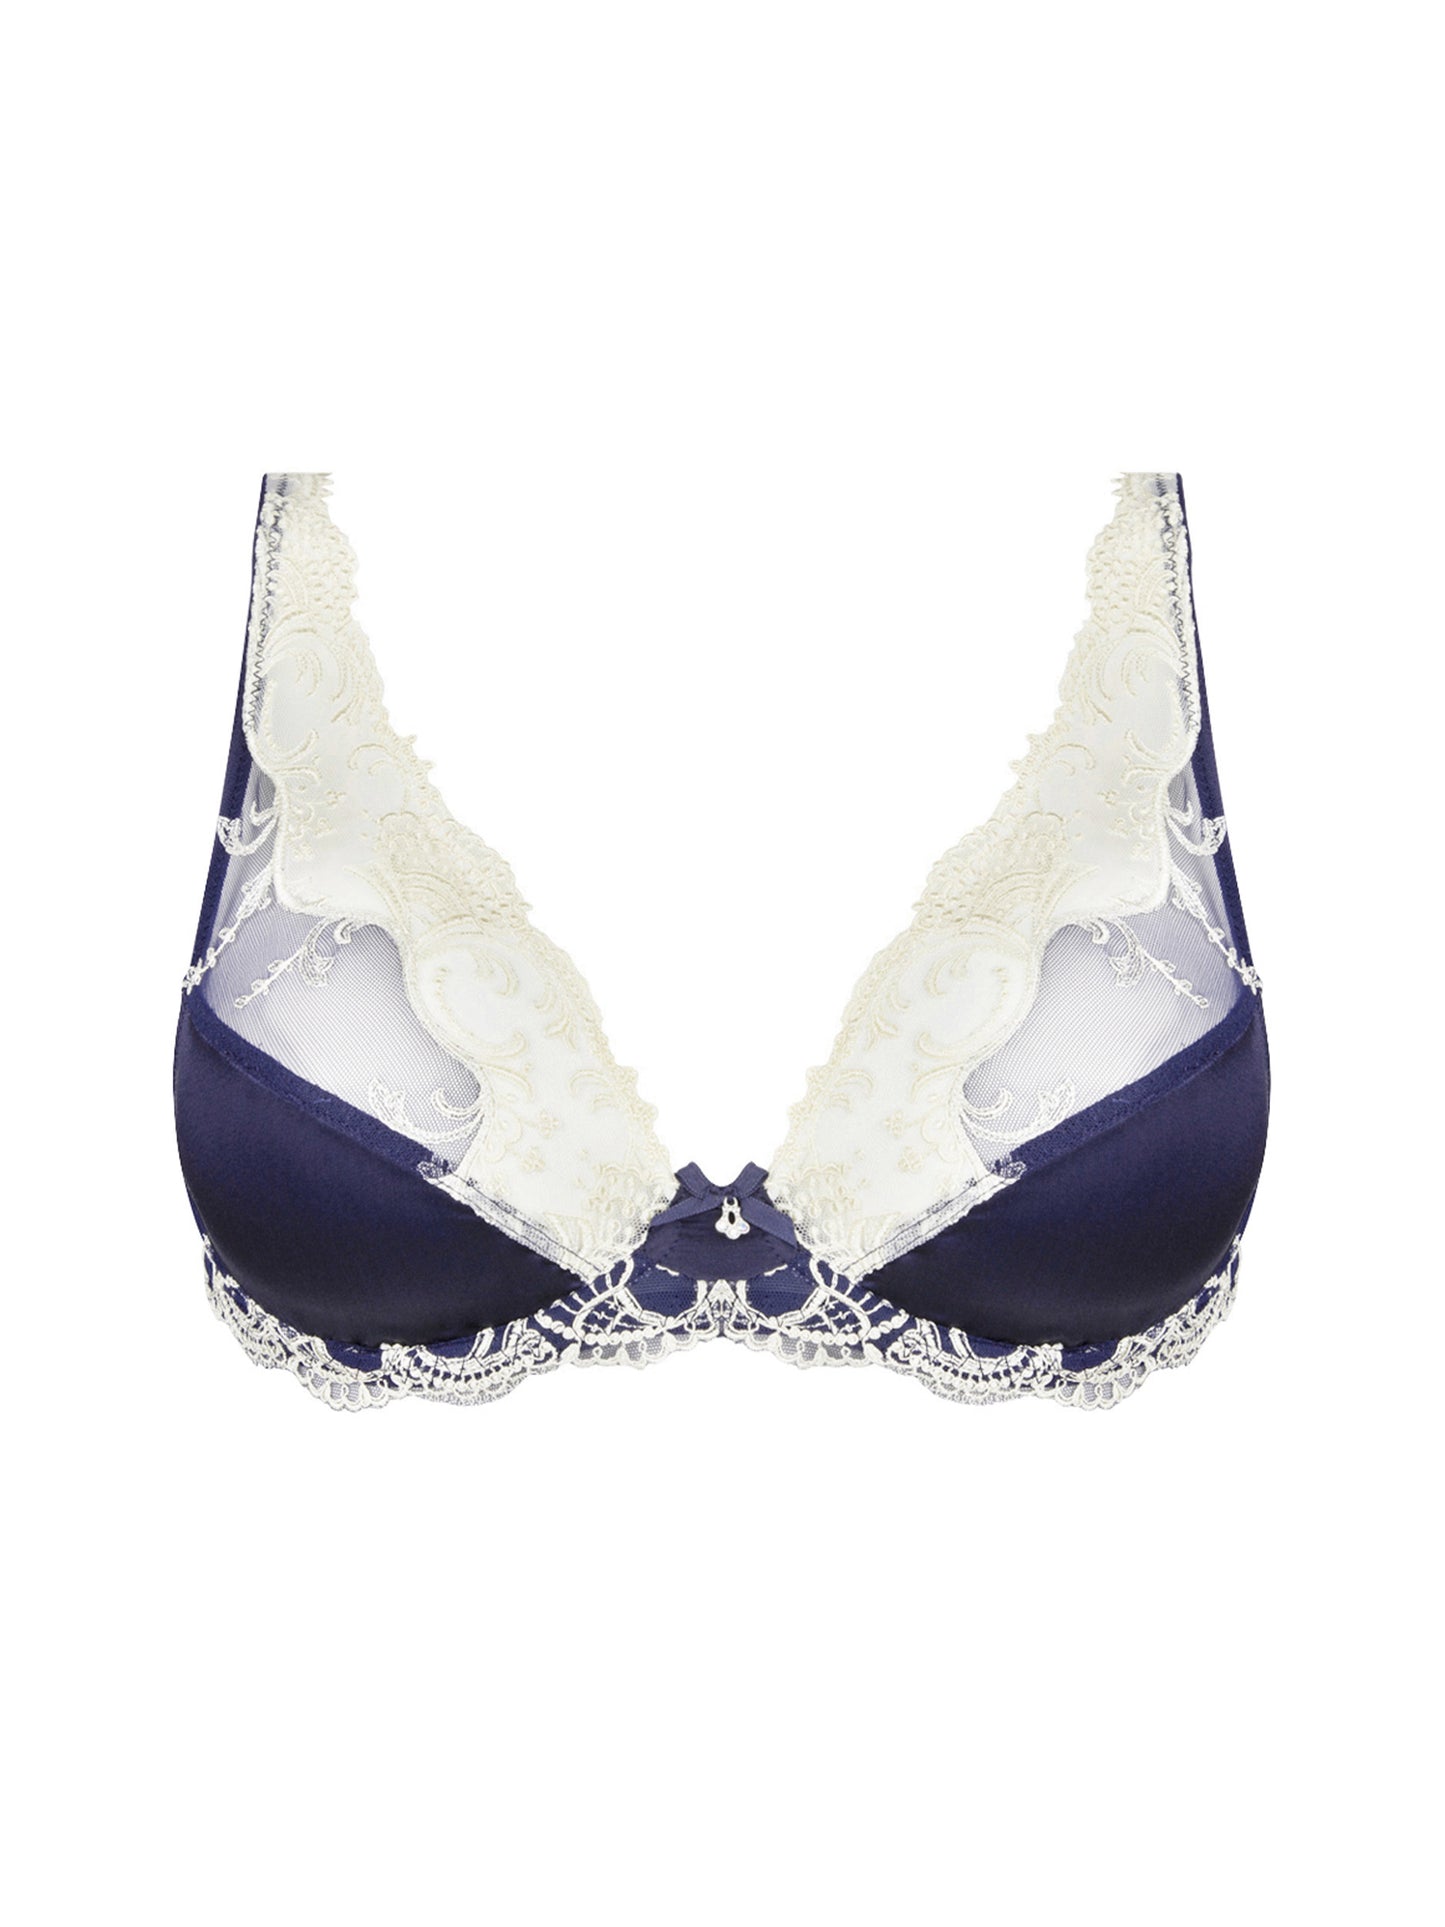 The Splendeur Soie line by Lise Charmel presents a luxurious triangle bra crafted with a satin-silk fabric and intricate Italian-made embroidery. 